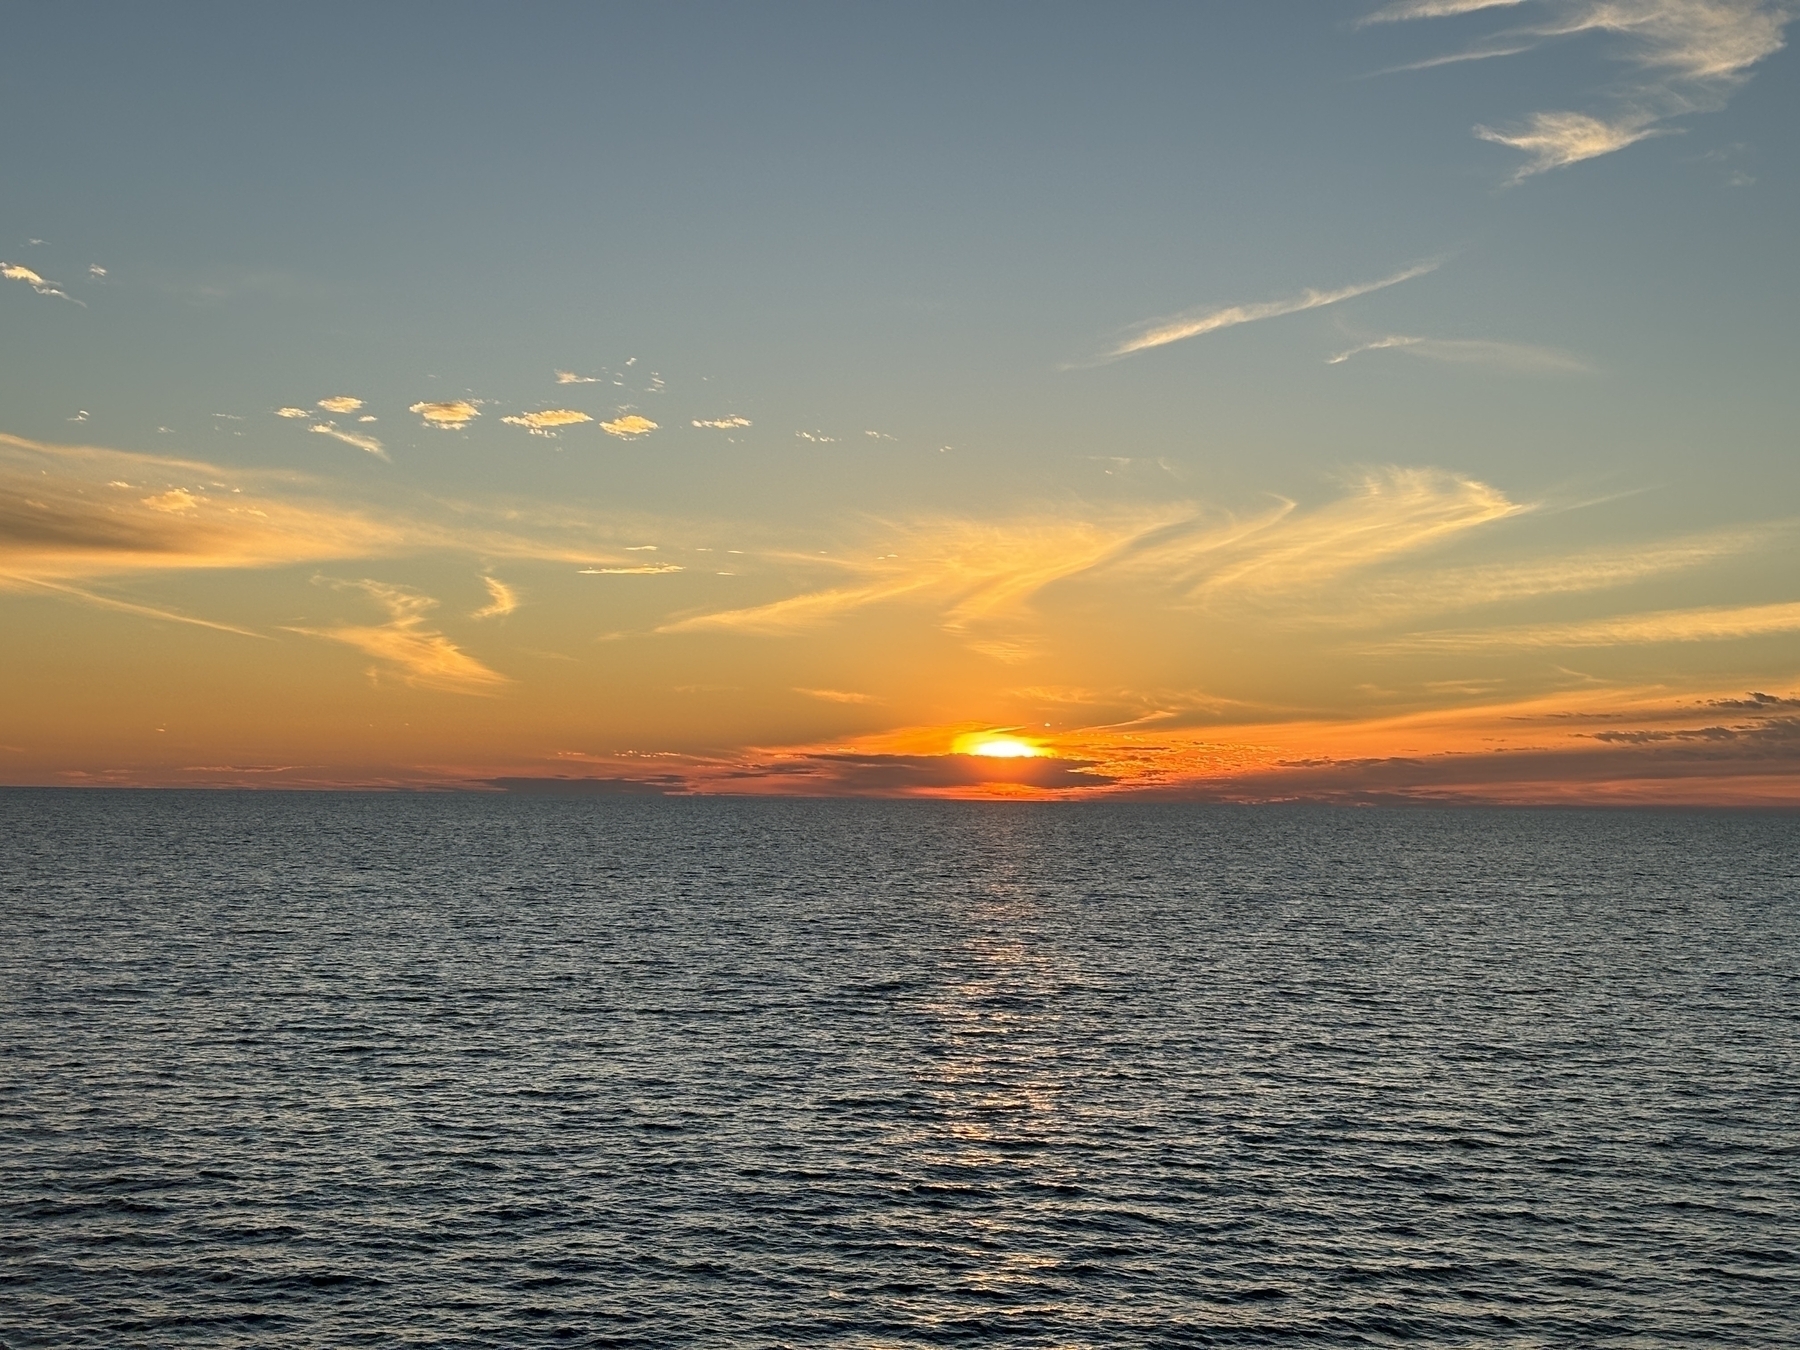 The sunset over the Gulf of Mexico from Panama City Beach